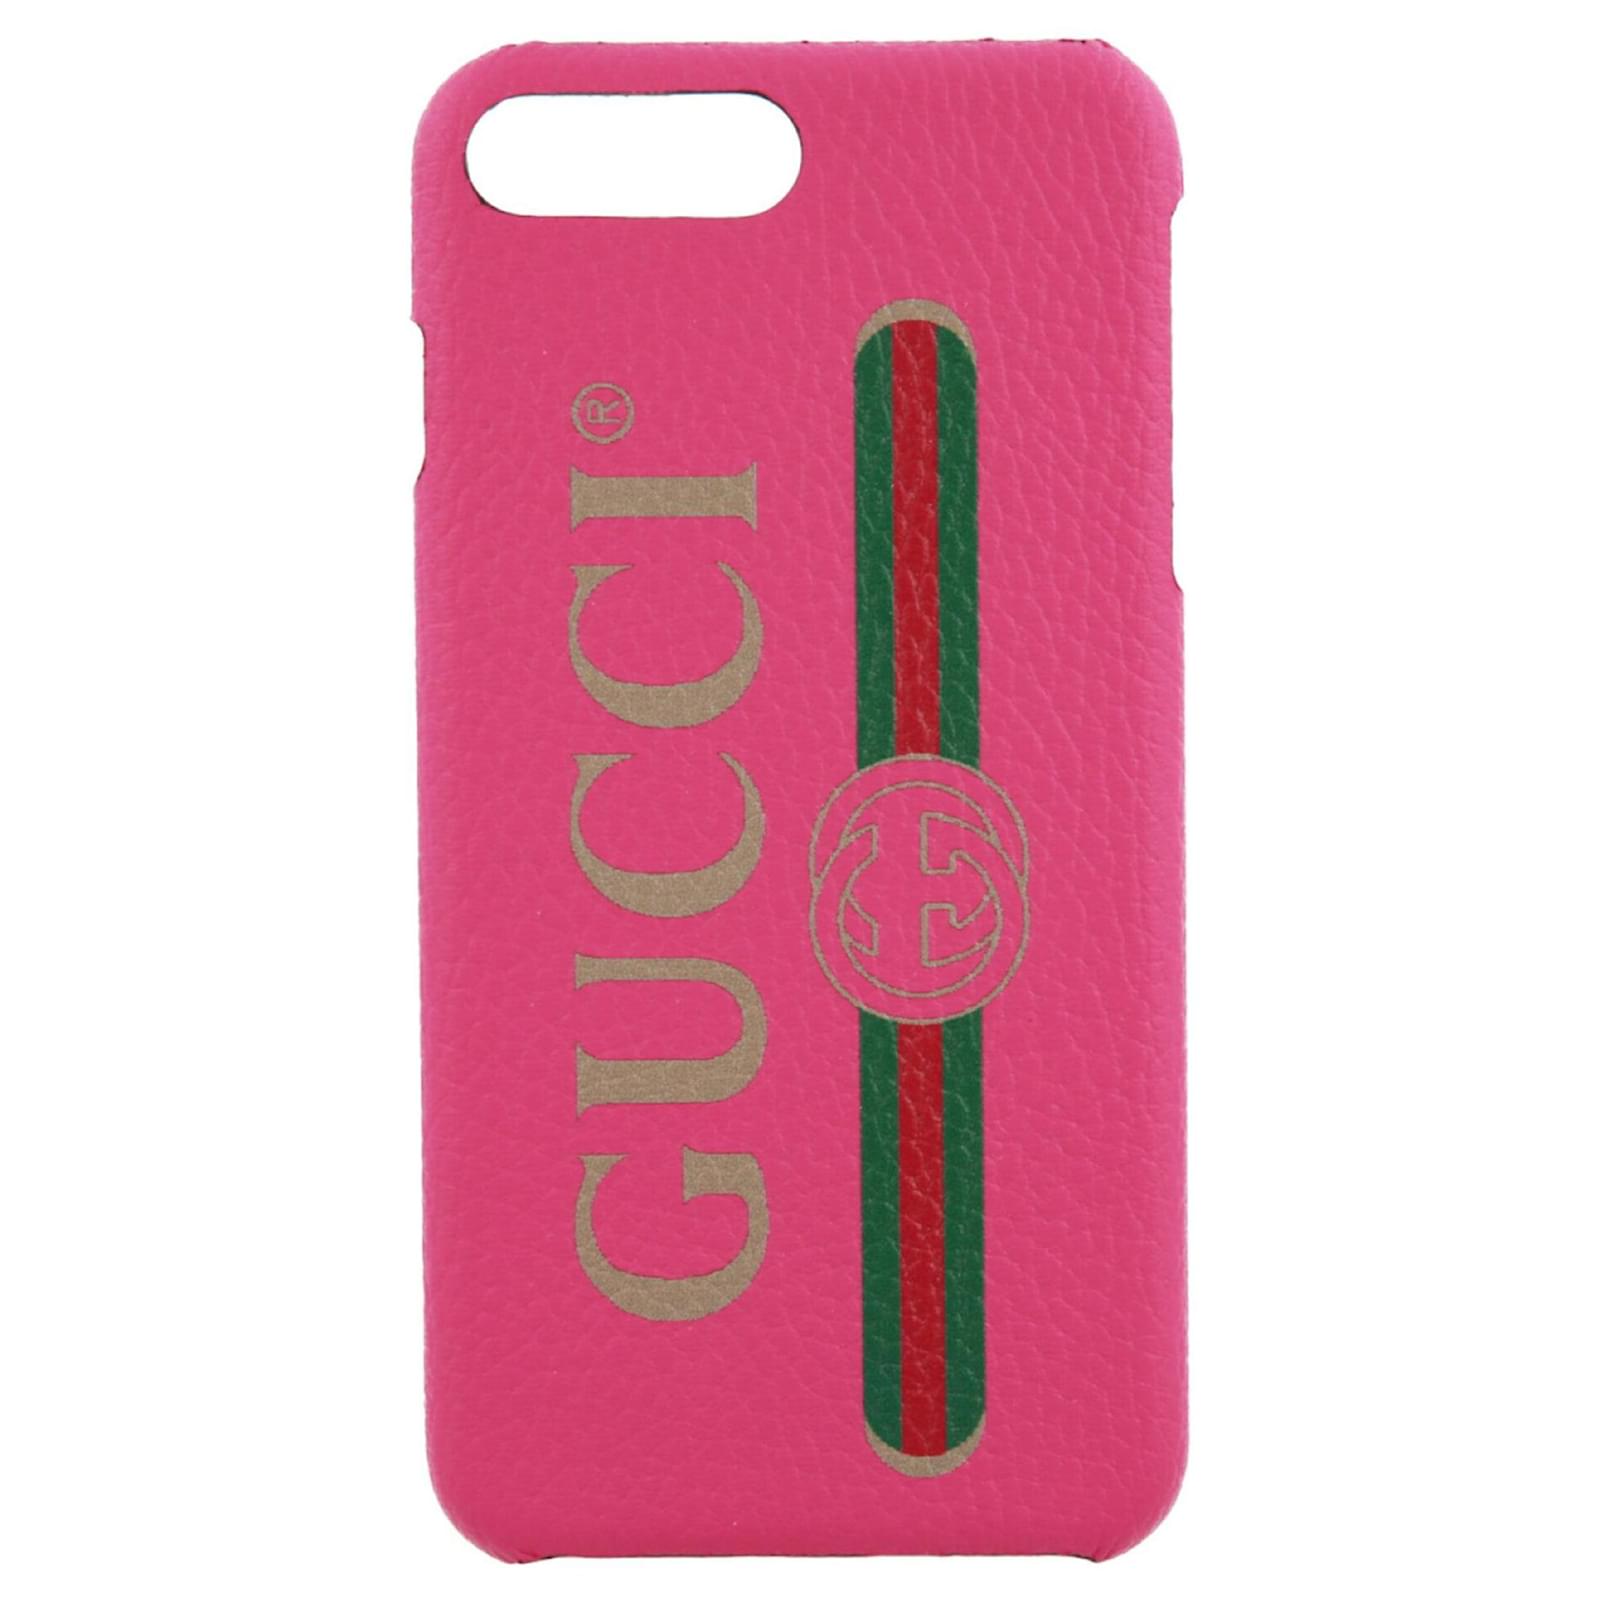 Gucci Cases for iPhone for sale